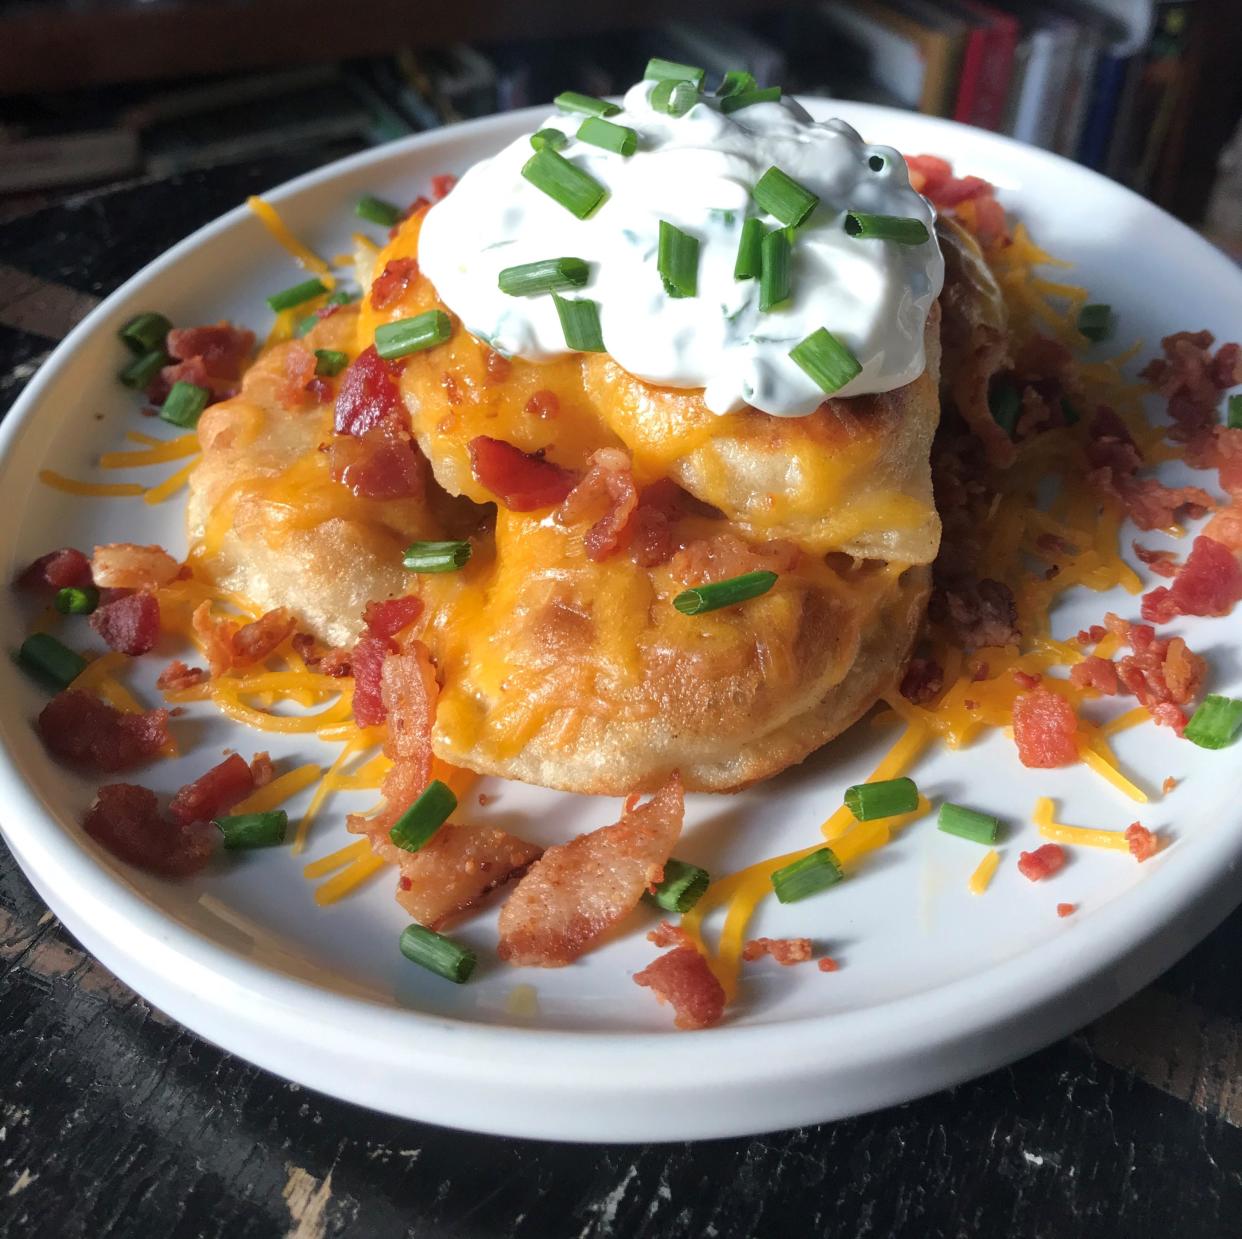 Pierogi, such as loaded baked potato with chive sour cream, will be among the menu items when four 3rd Street Market Hall vendors pop up Dec. 5 for lunch at Hawthorne Coffee Roasters on Milwaukee's south side.